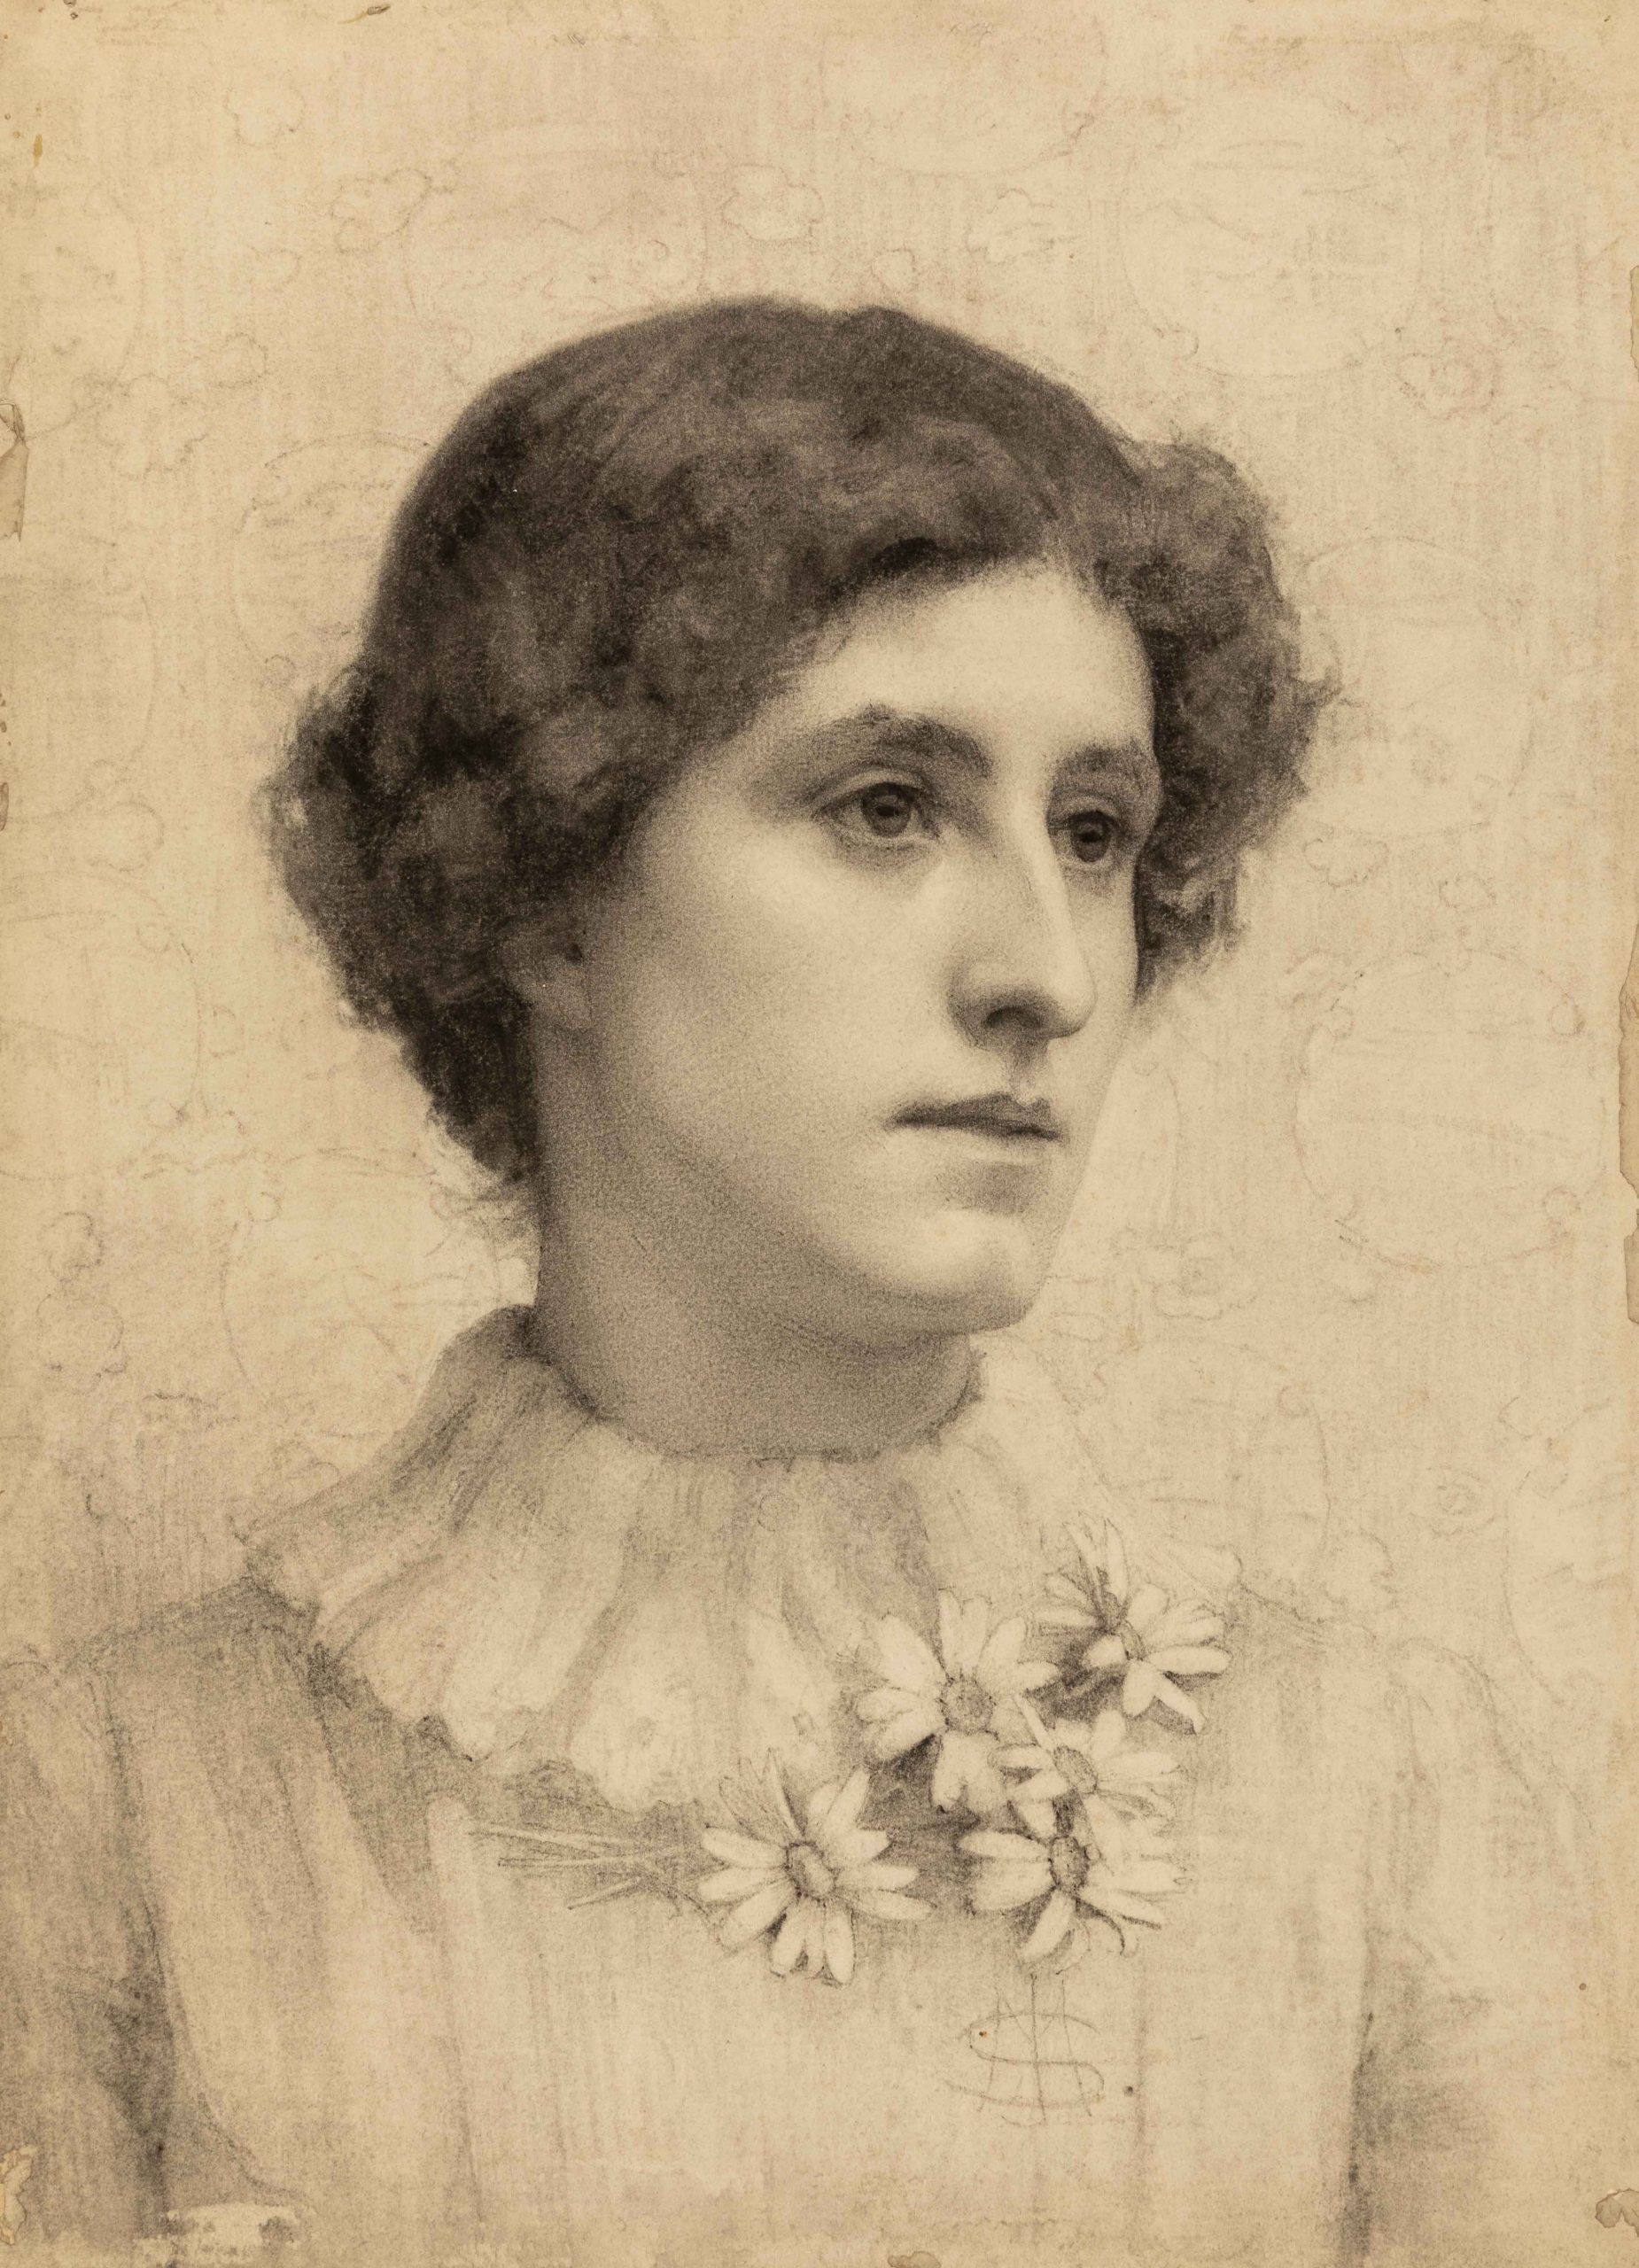 Bust-length portrait of a woman in front of patterned wallpaper  